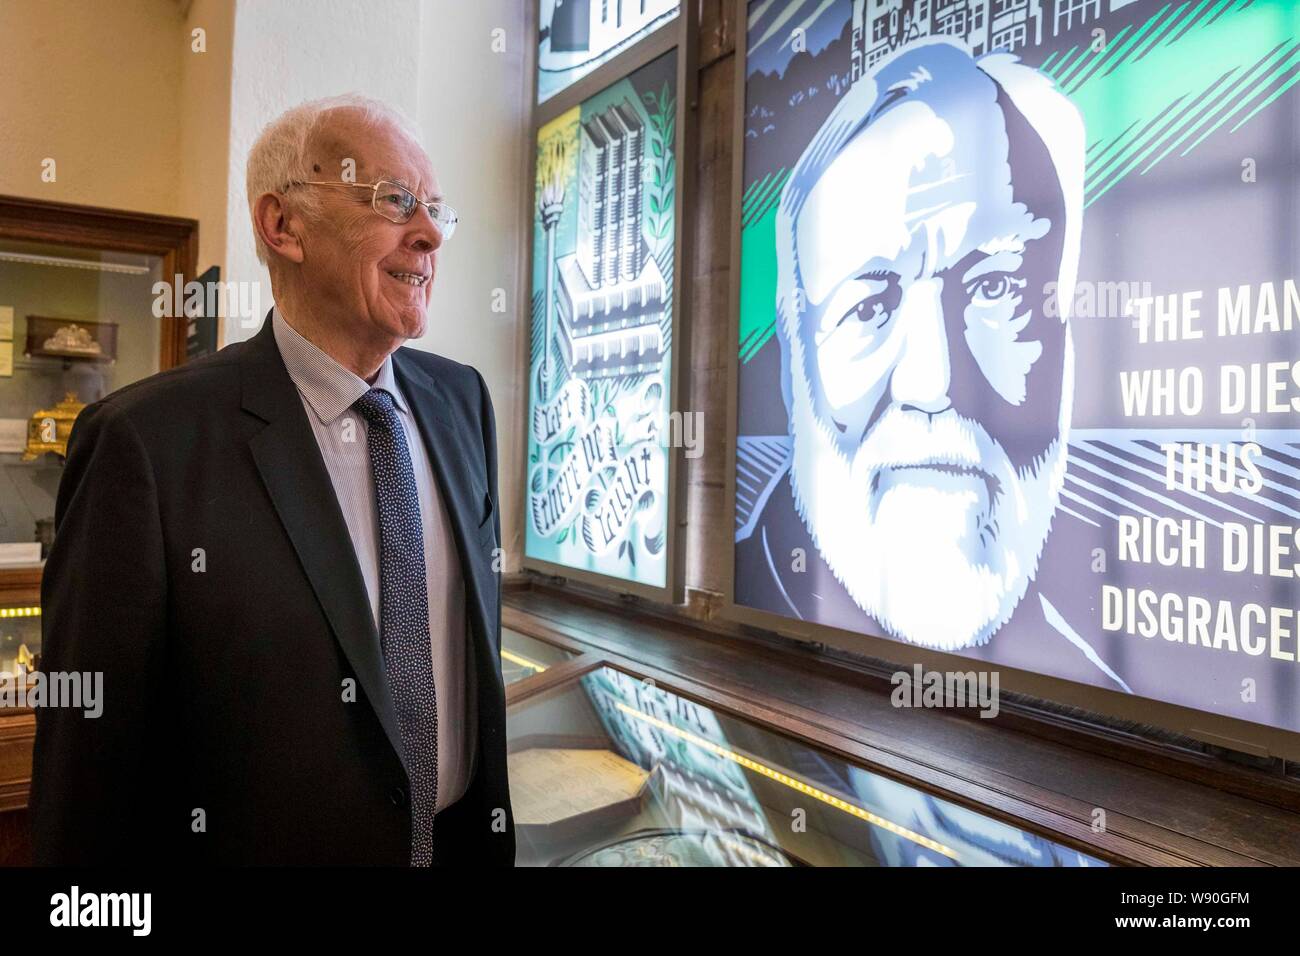 Dunfermline, UK. 12th Aug, 2019. Sir Ian Wood has been announced as one of the recipients of the Carnegie Medal of Philanthropy at the Carnegie Birthplace Museum in Dunfermline. The other medalists who will also receive their awards at a ceremony in New York in October are Anne G Earhart, Mellody Hobson and George Lucas, Marie-Josee and Henry R Kravis, Morton L Mandel, Robert F Smith and Dr Leonard Tow. Pictured: Sir Ian Wood at the Carnegie Birthplace Museum Credit: Rich Dyson/Alamy Live News Stock Photo